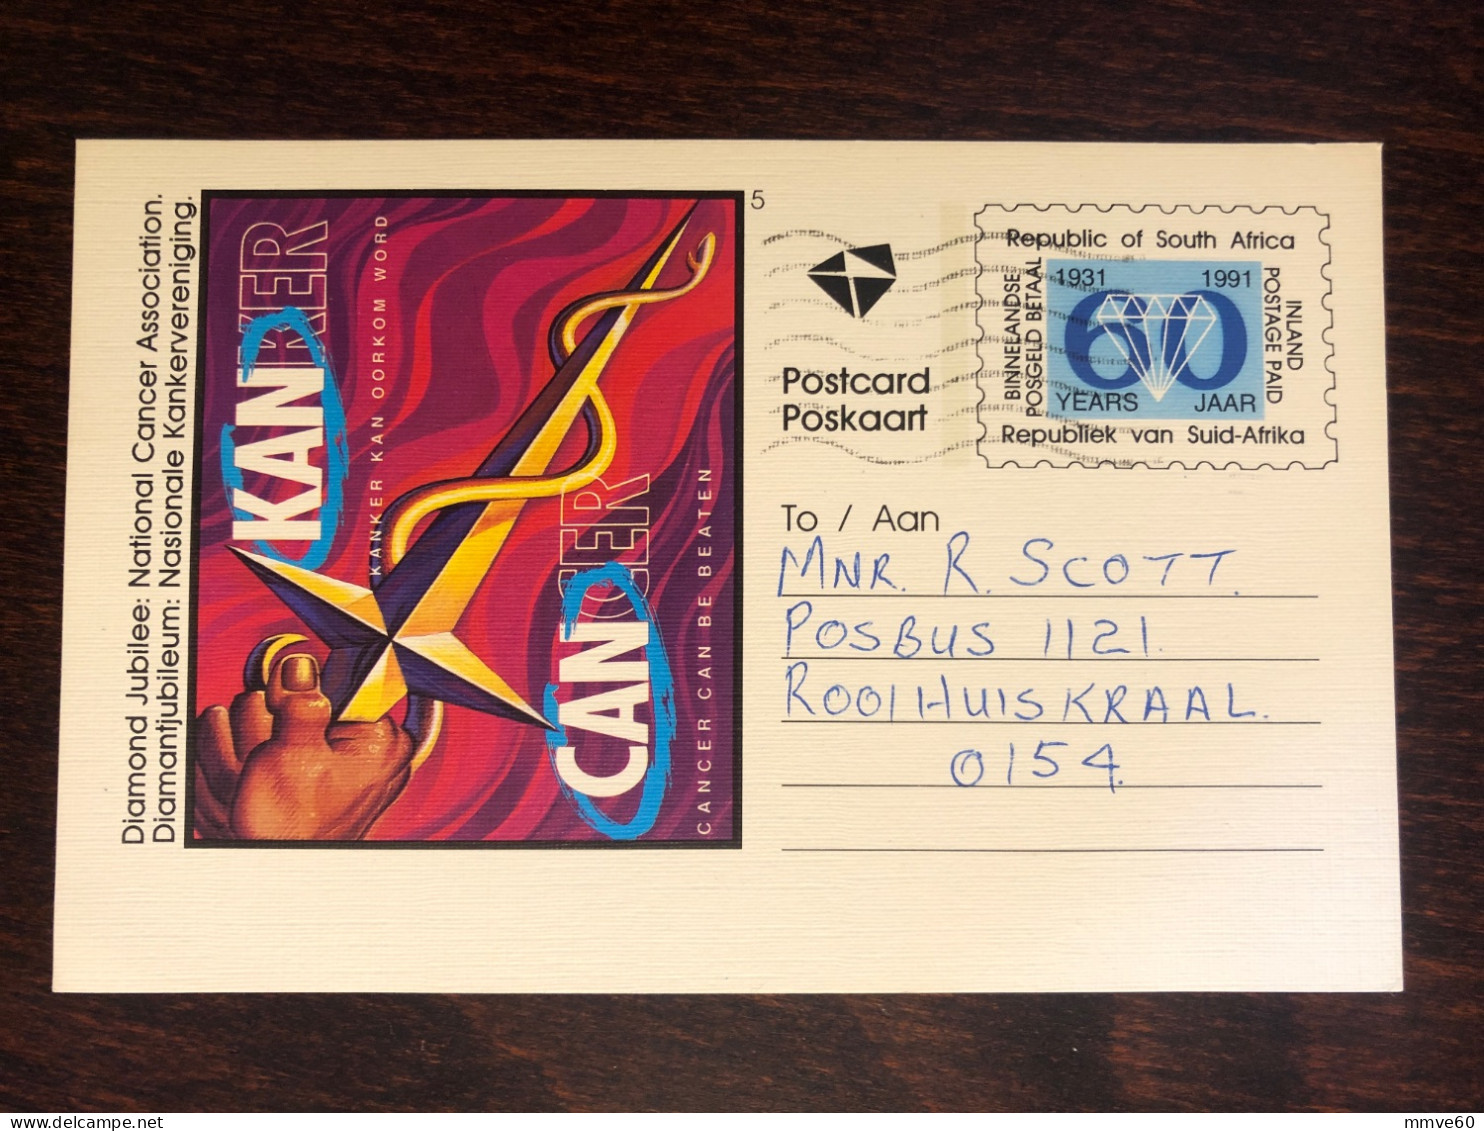 SOUTH AFRICA OFFICIAL POSTAL CARD 1991 YEAR  CANCER ASSOCIATION HEALTH MEDICINE - Covers & Documents